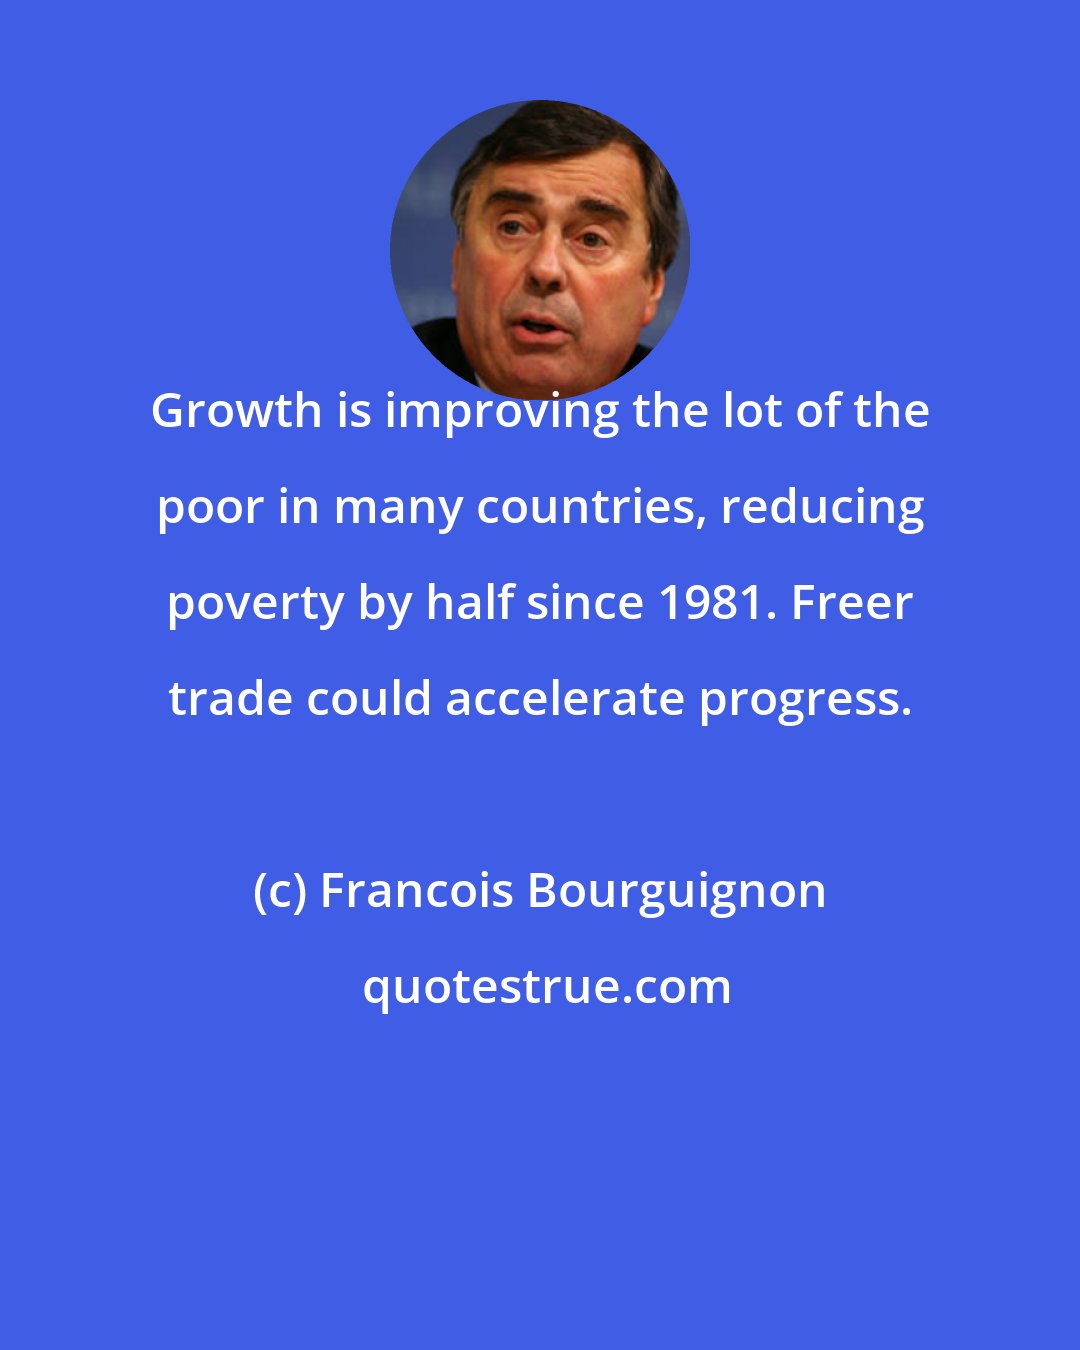 Francois Bourguignon: Growth is improving the lot of the poor in many countries, reducing poverty by half since 1981. Freer trade could accelerate progress.